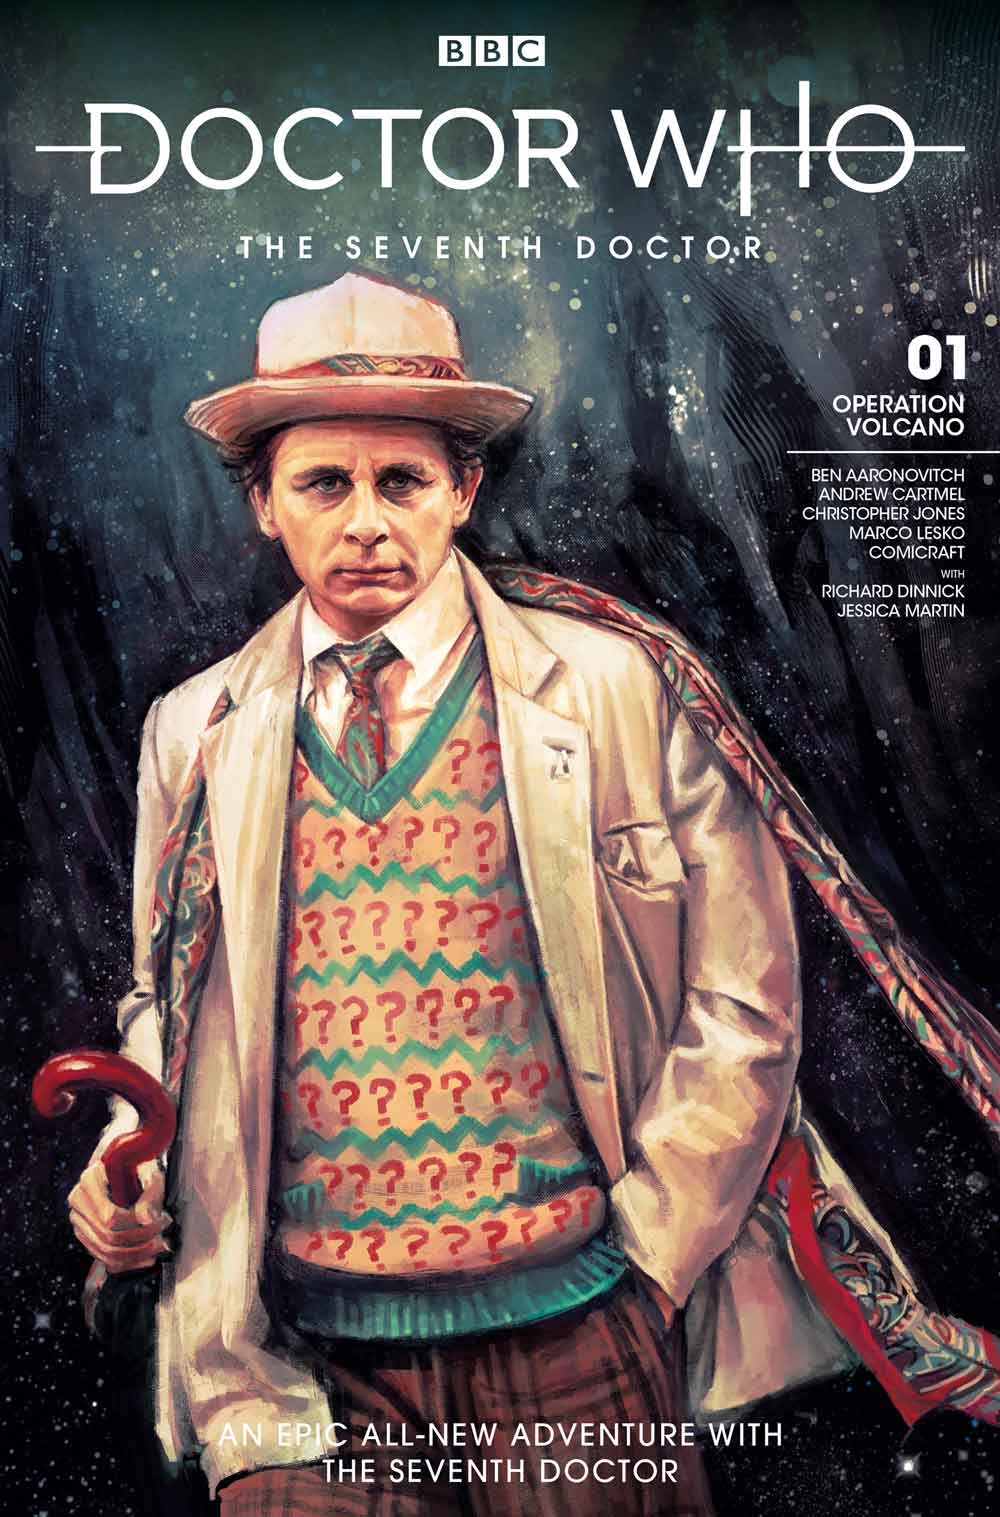 DOCTOR WHO 7TH #1 (OF 3) CVR A ZHANG